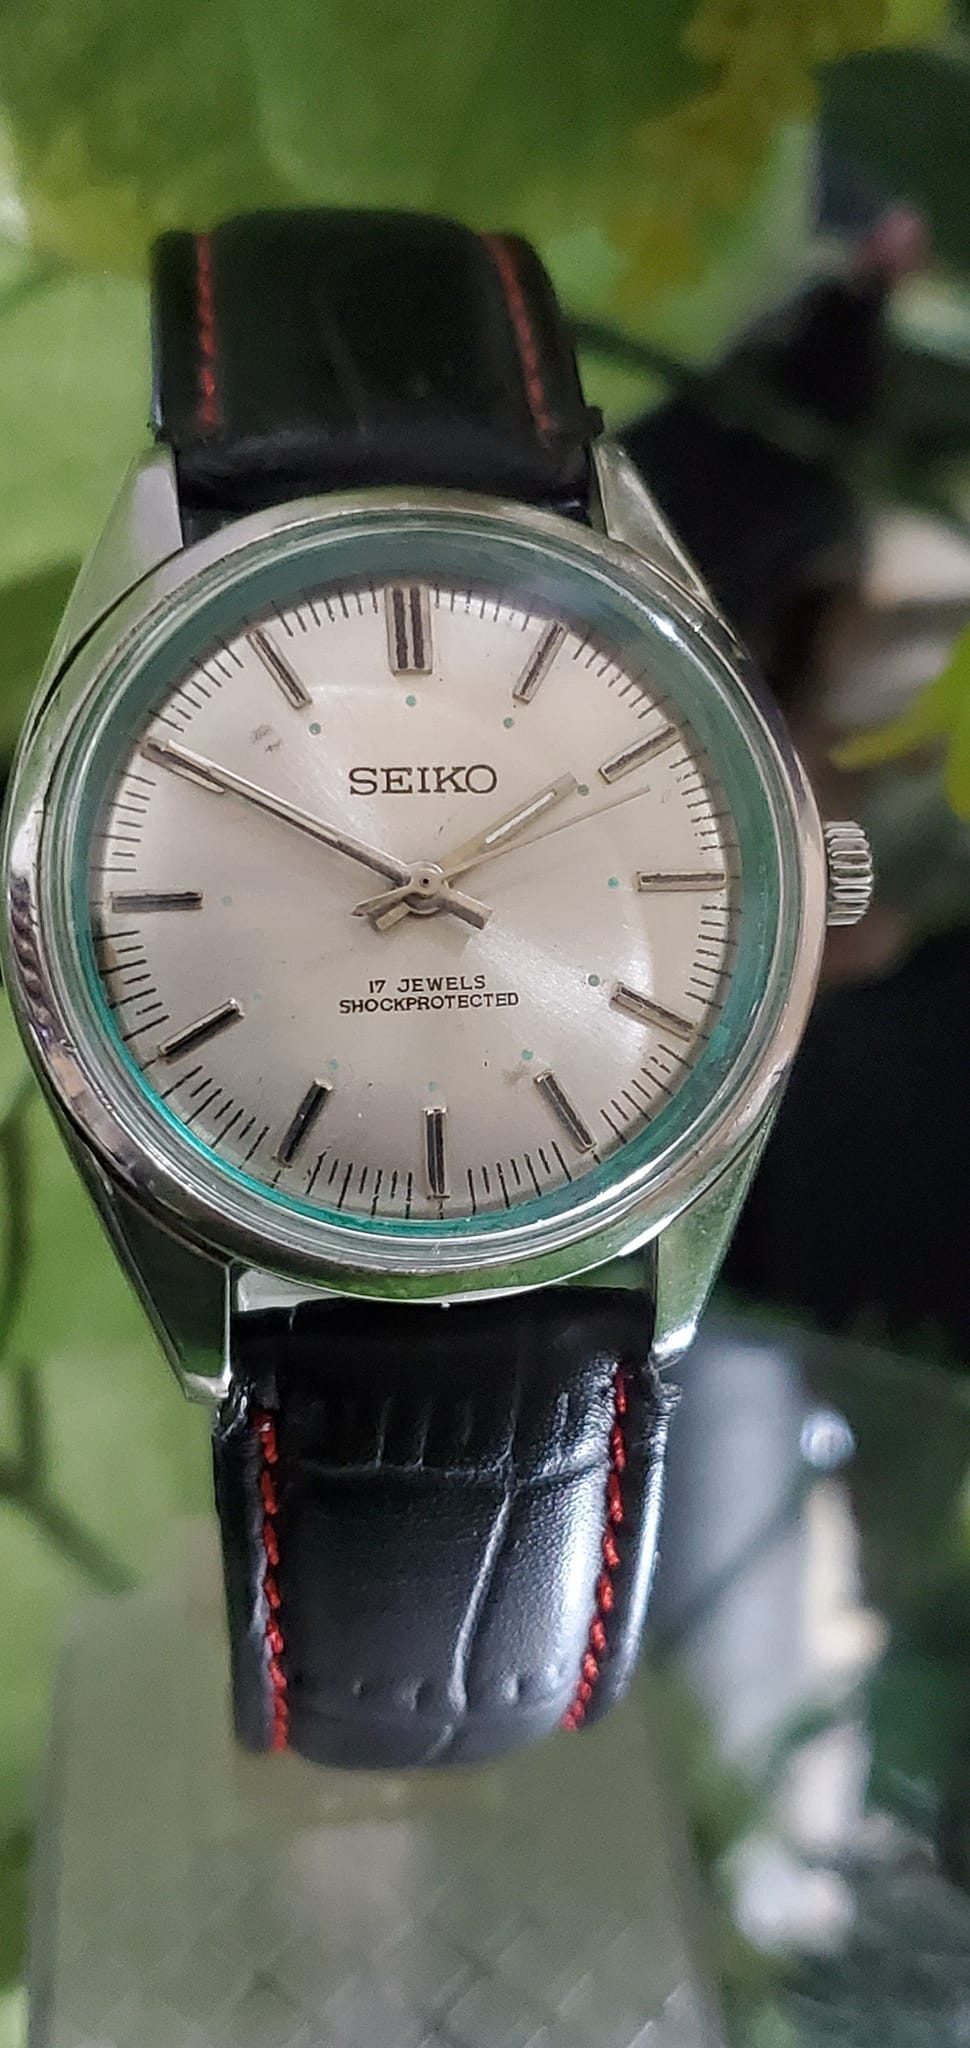 Vintage and Rare Seiko Shockprotacted Japan made Handwind Watch for Men's